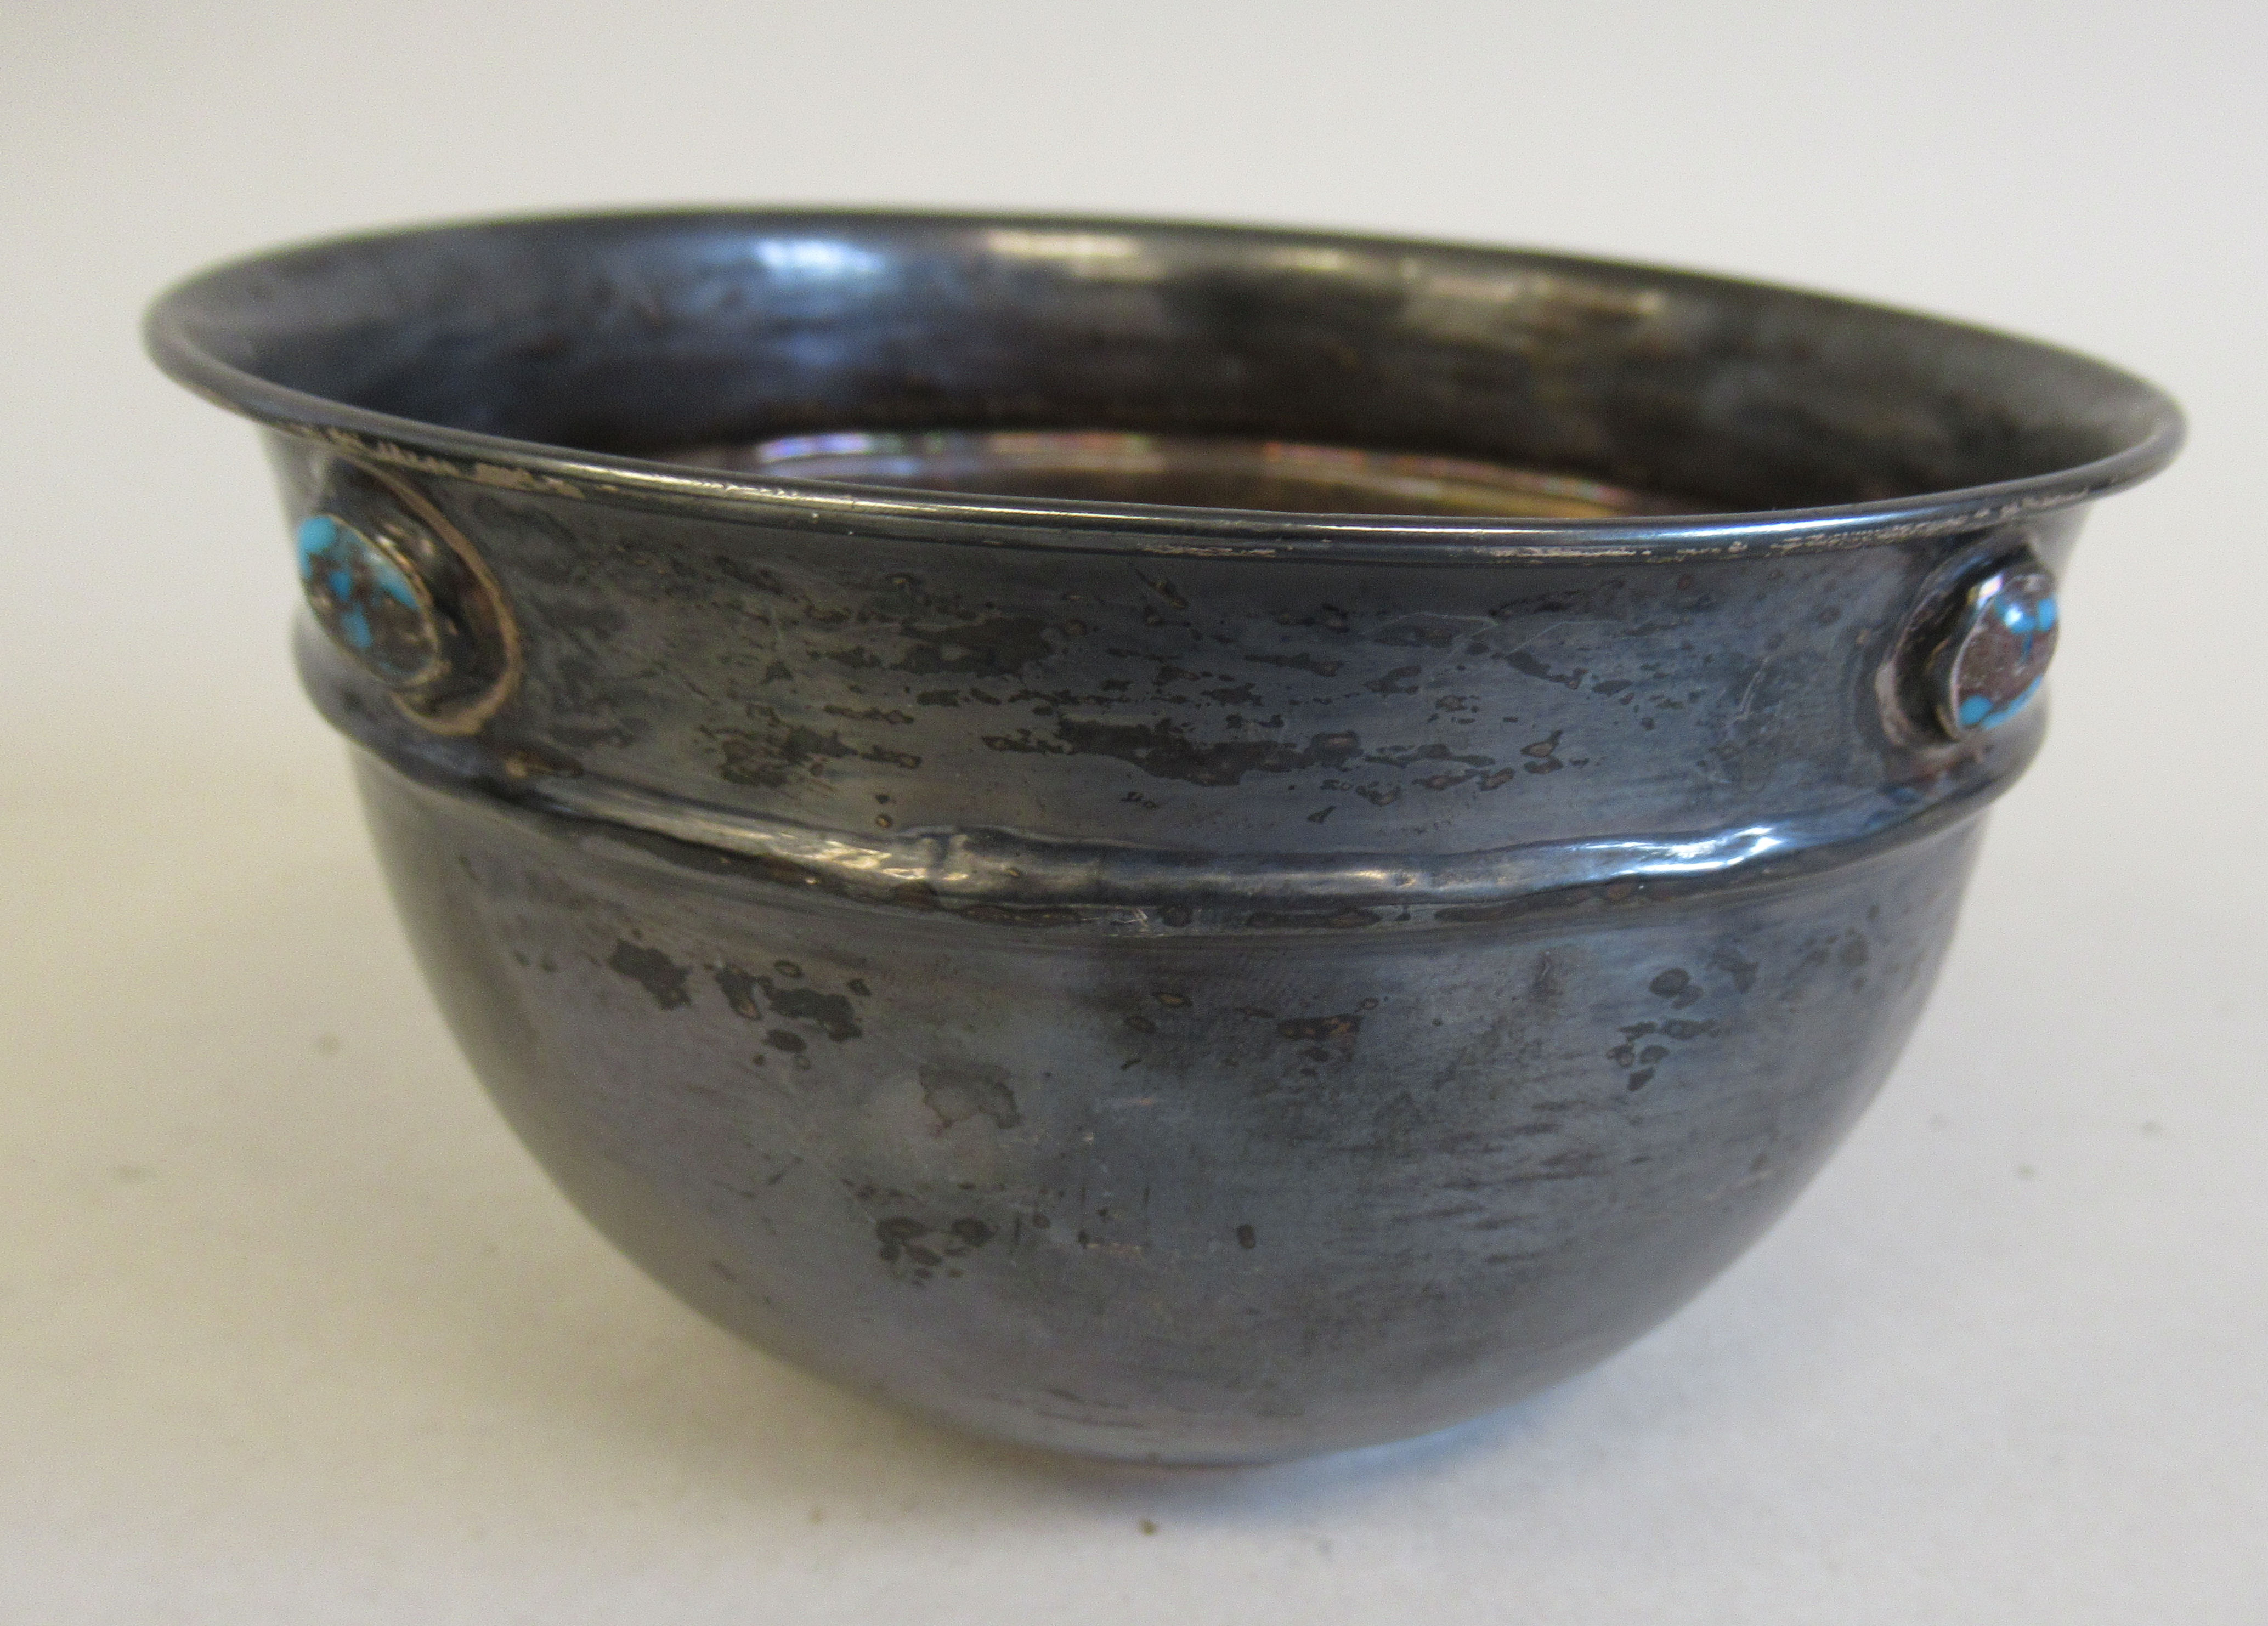 An Art Nouveau silver bowl with a rolled rim and a frieze of four uniformly spaced turquoise